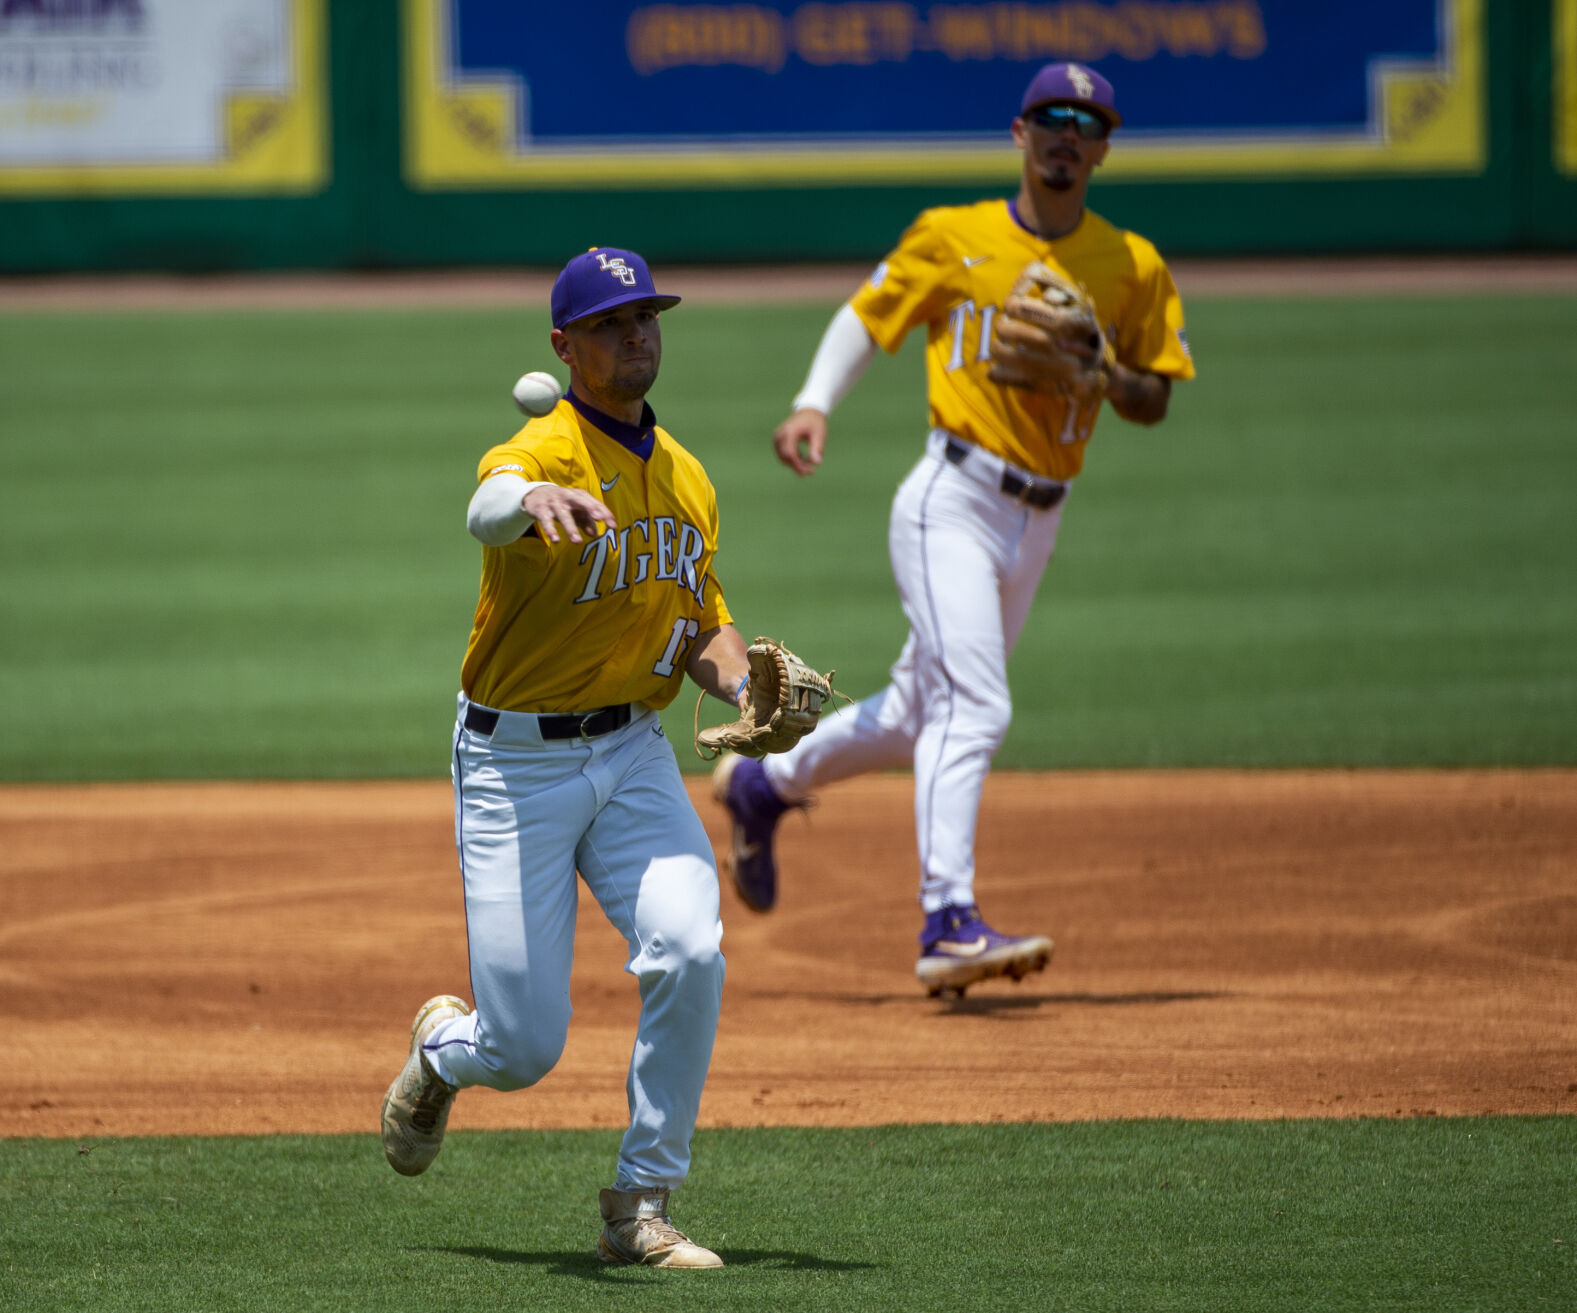 LSU's Collier Cranford waited for his shot. Now he's making his mark at third base.